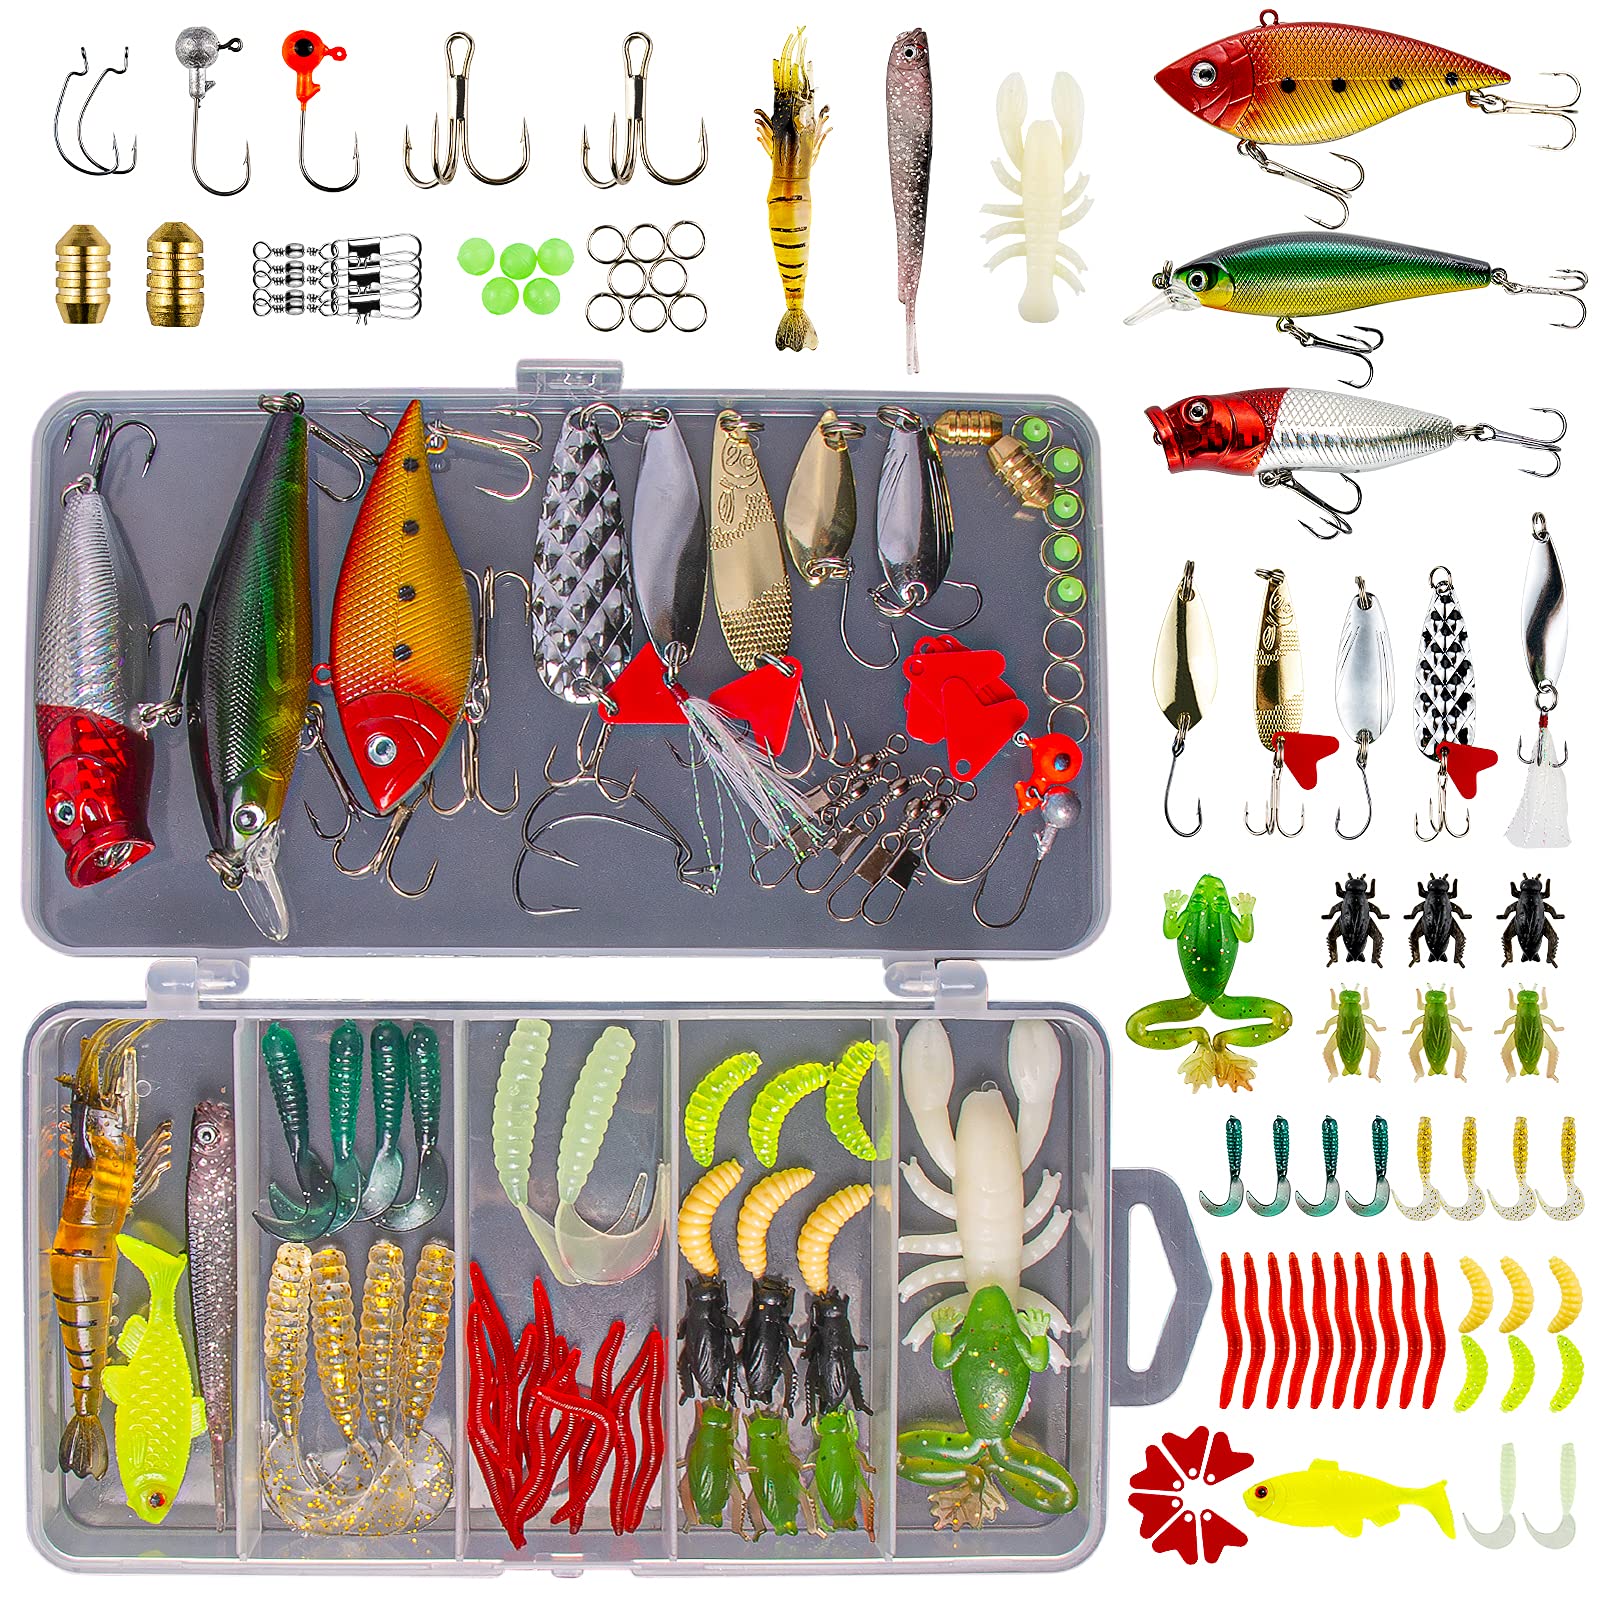 Adoolla Fishing Lures Set Minnow Frog Spoon Soft Bait Fishhook Set Fishing  Tackle Accessories For Freshwater Seawater